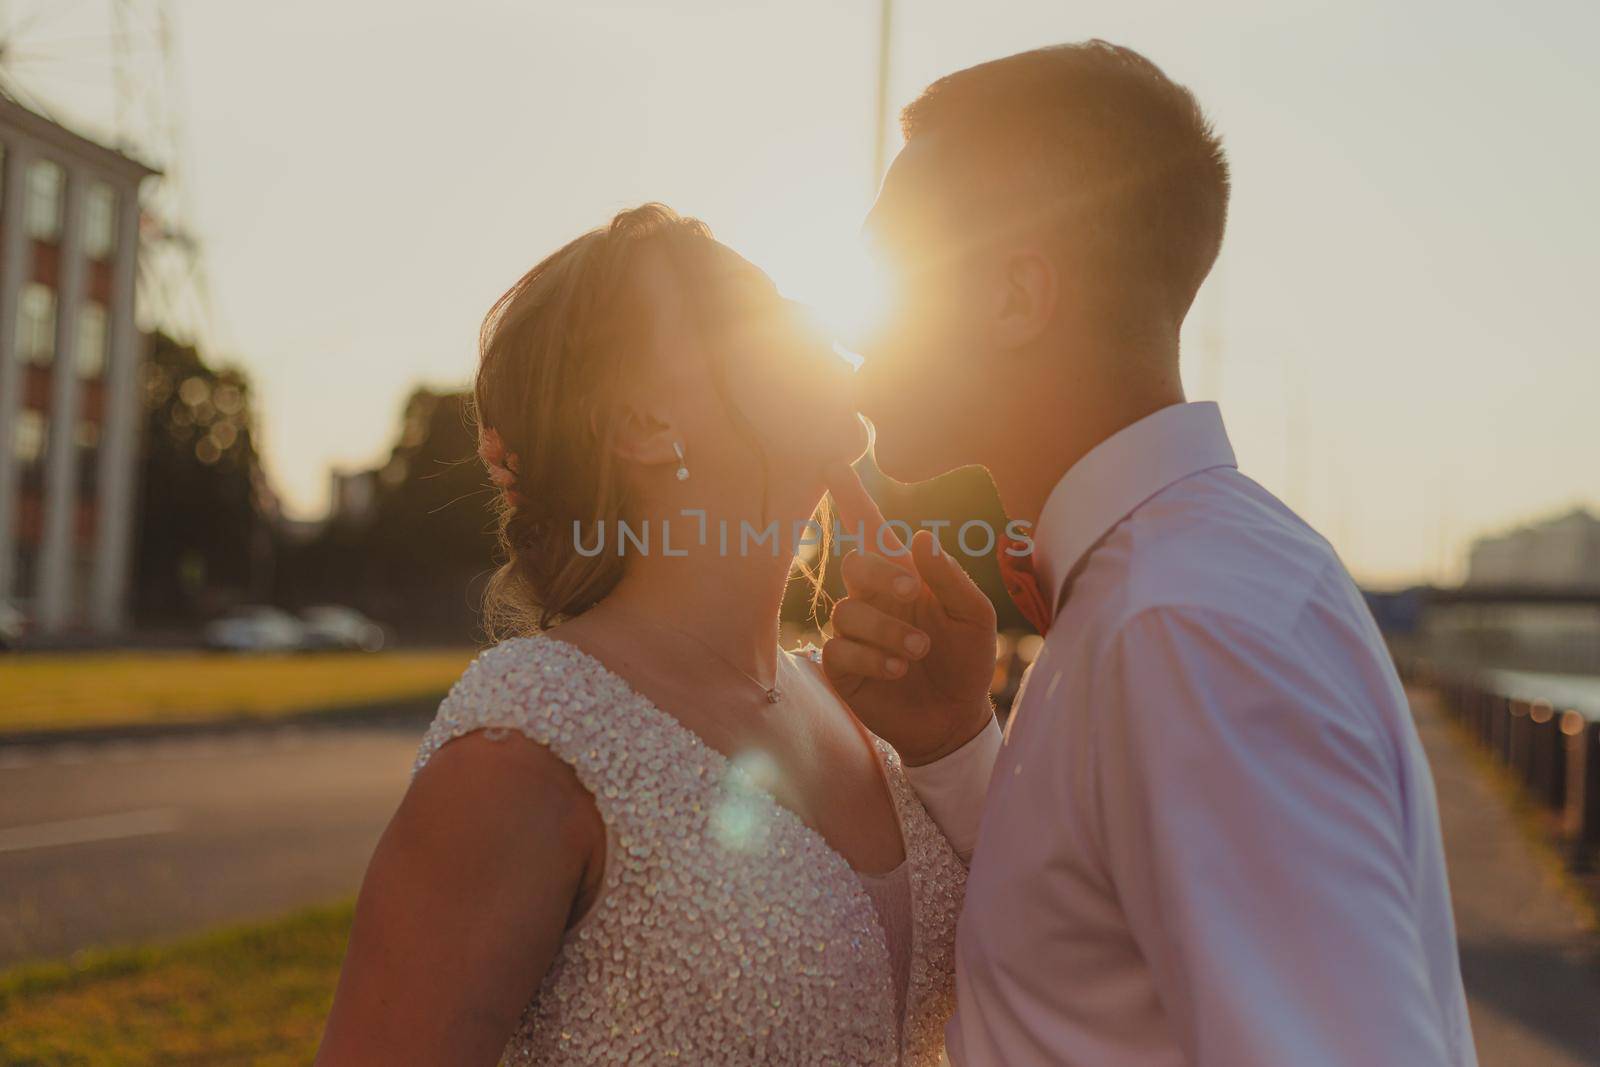 A kiss of the bride and groom at sunset. Wedding article. A happy couple. Love. Photos for printed products. Romance